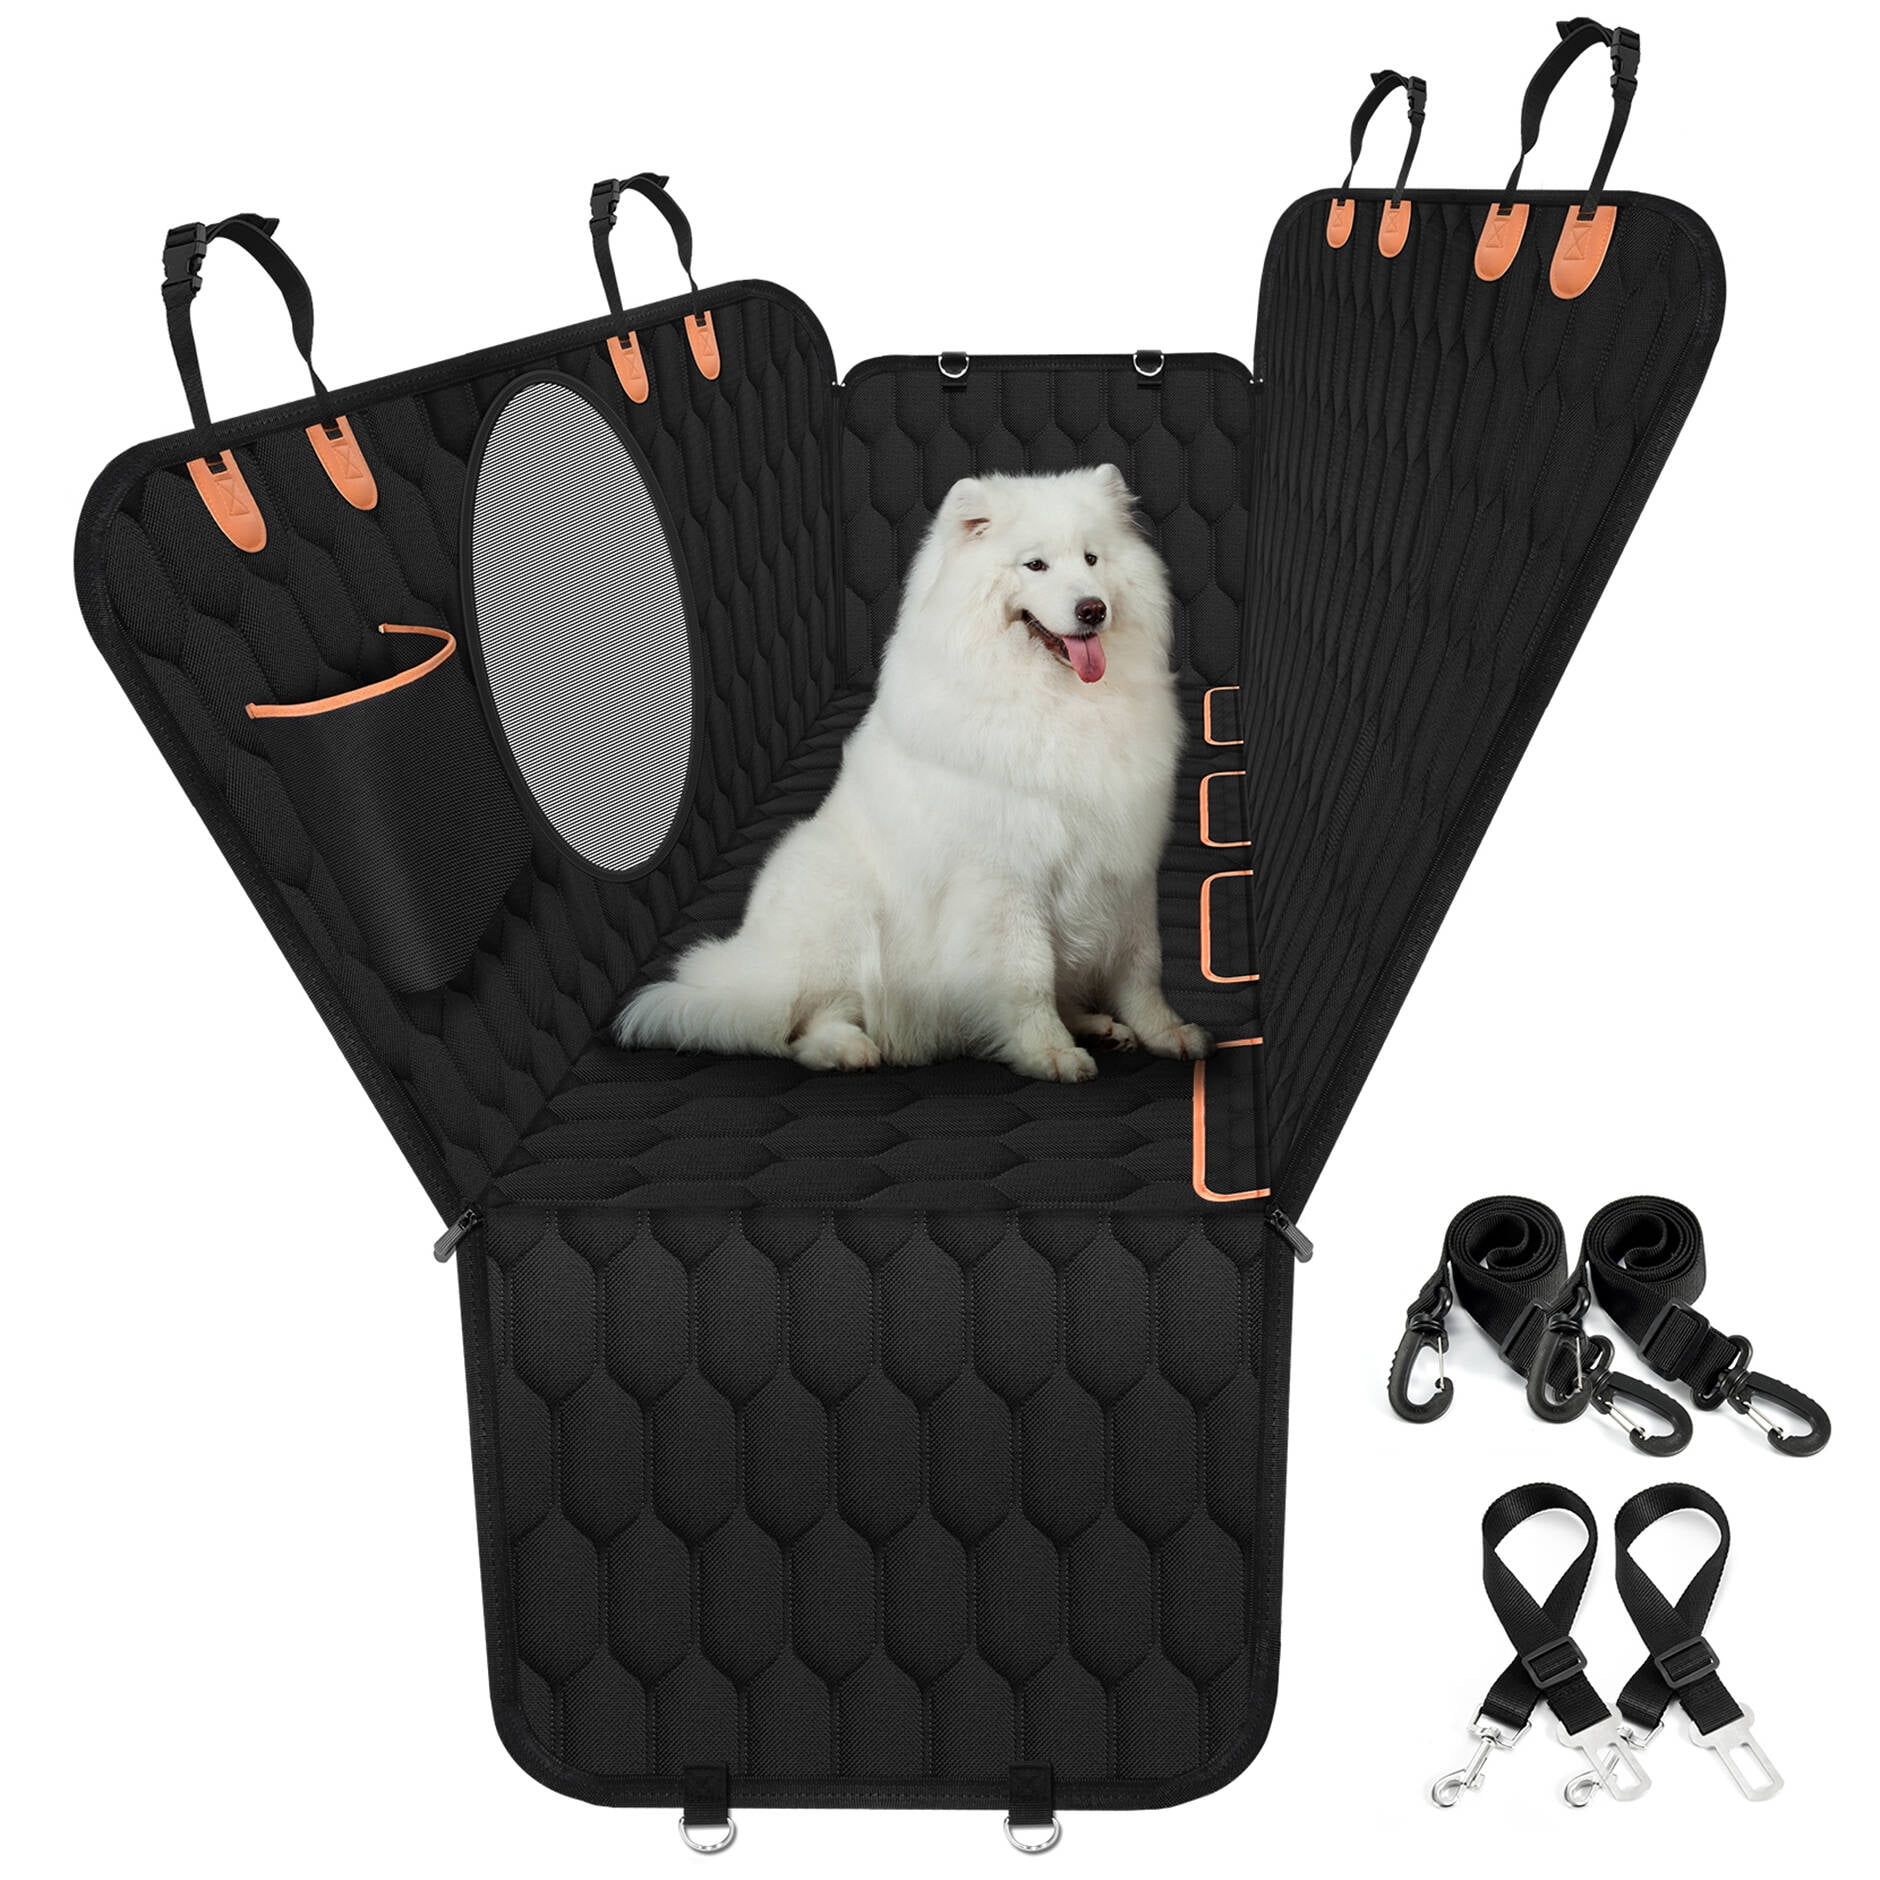 OEM ODM Travel Scratch Proof Dog Big Size Waterproof Seat Car Boot Cover  for Pets - China Dog Car Seat Cover, Dog Car Seat Cover Waterproof Pet Seat  Cover